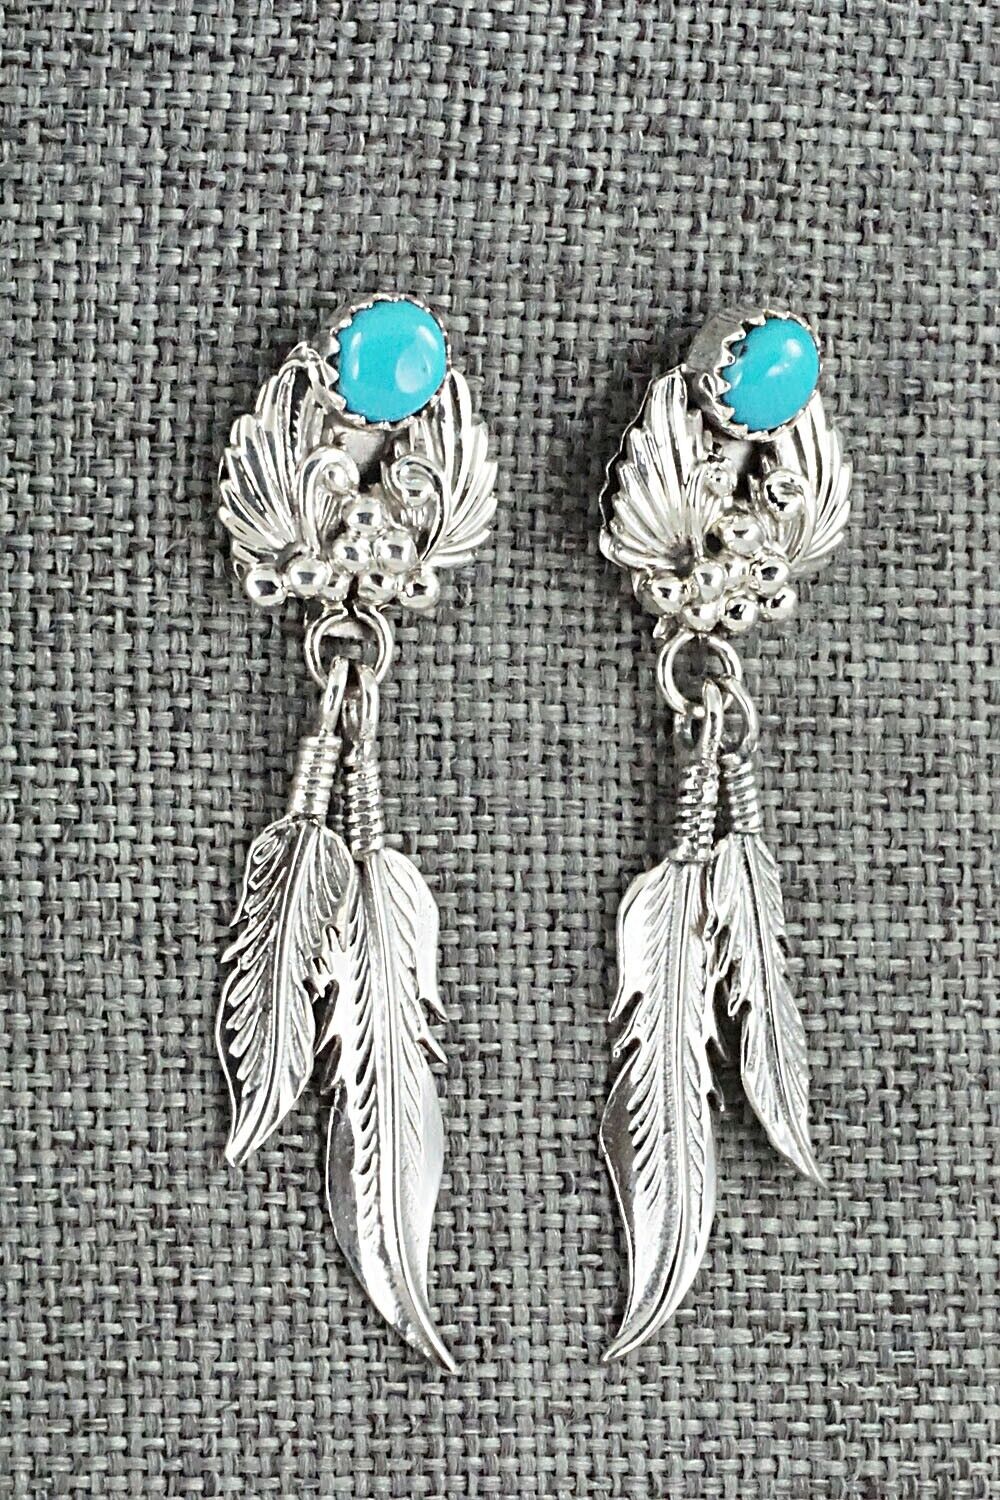 Turquoise & Sterling Silver Earrings - Roger Pino